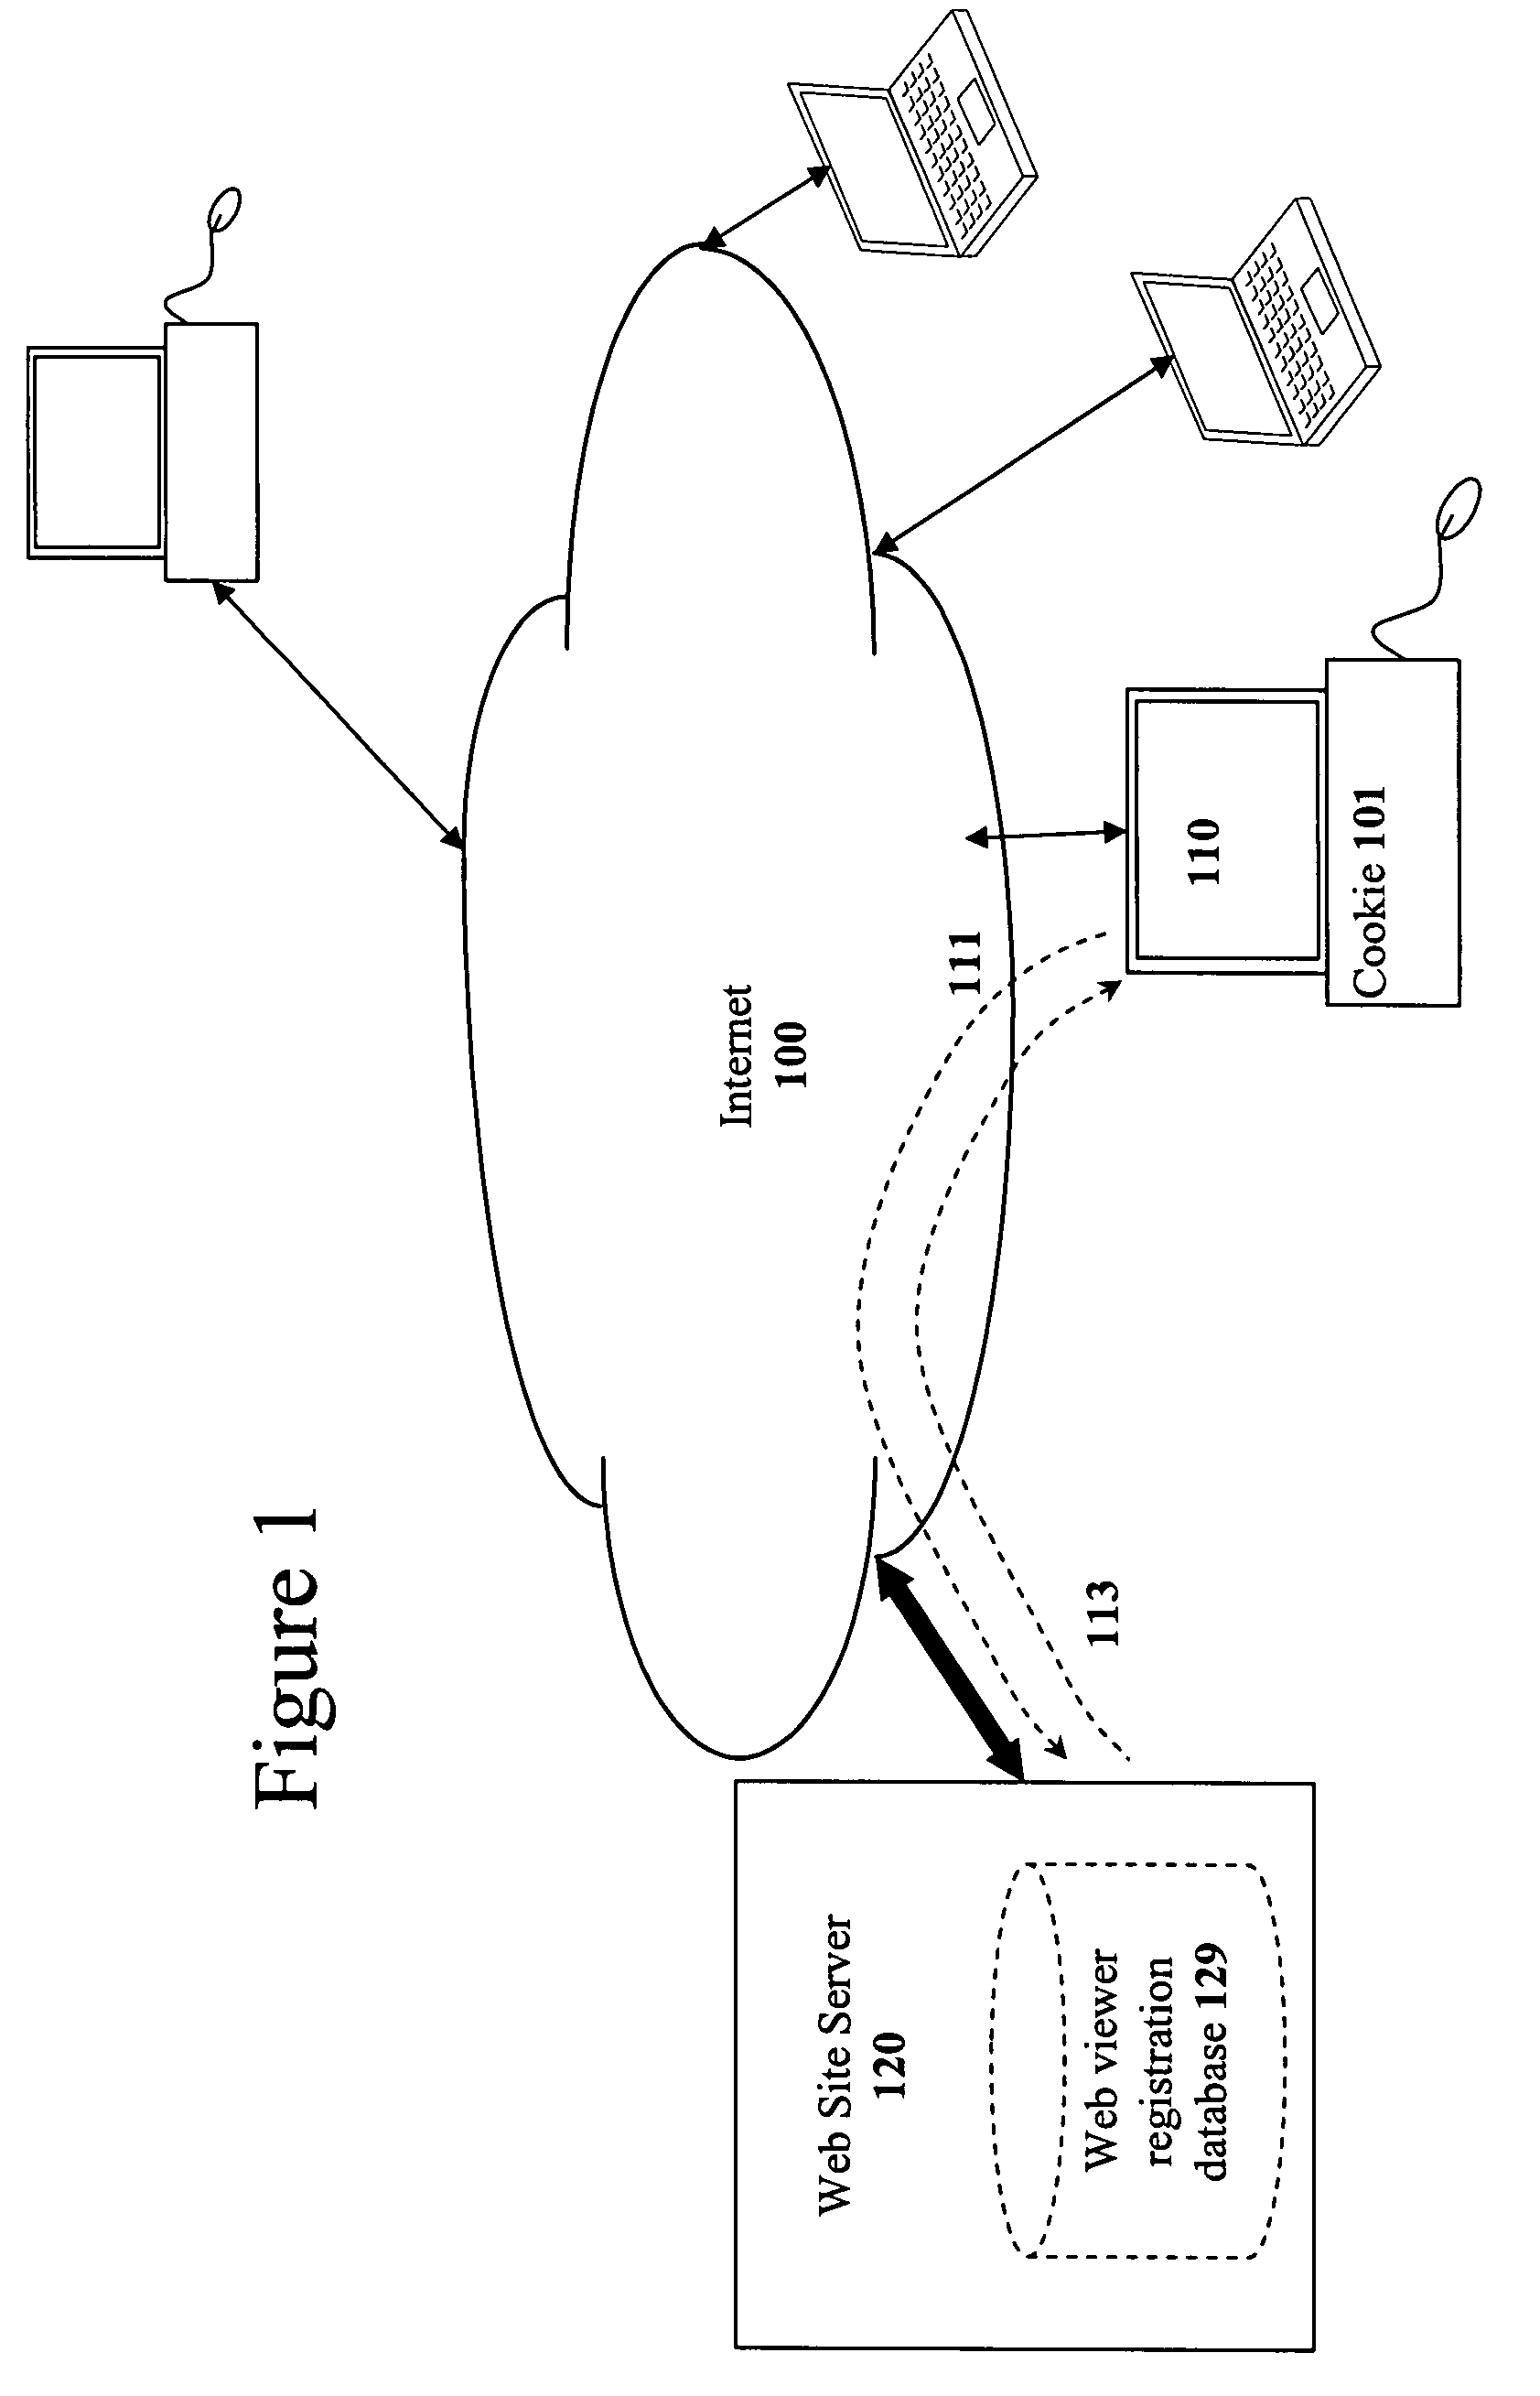 Methods of processing and segmenting web usage information